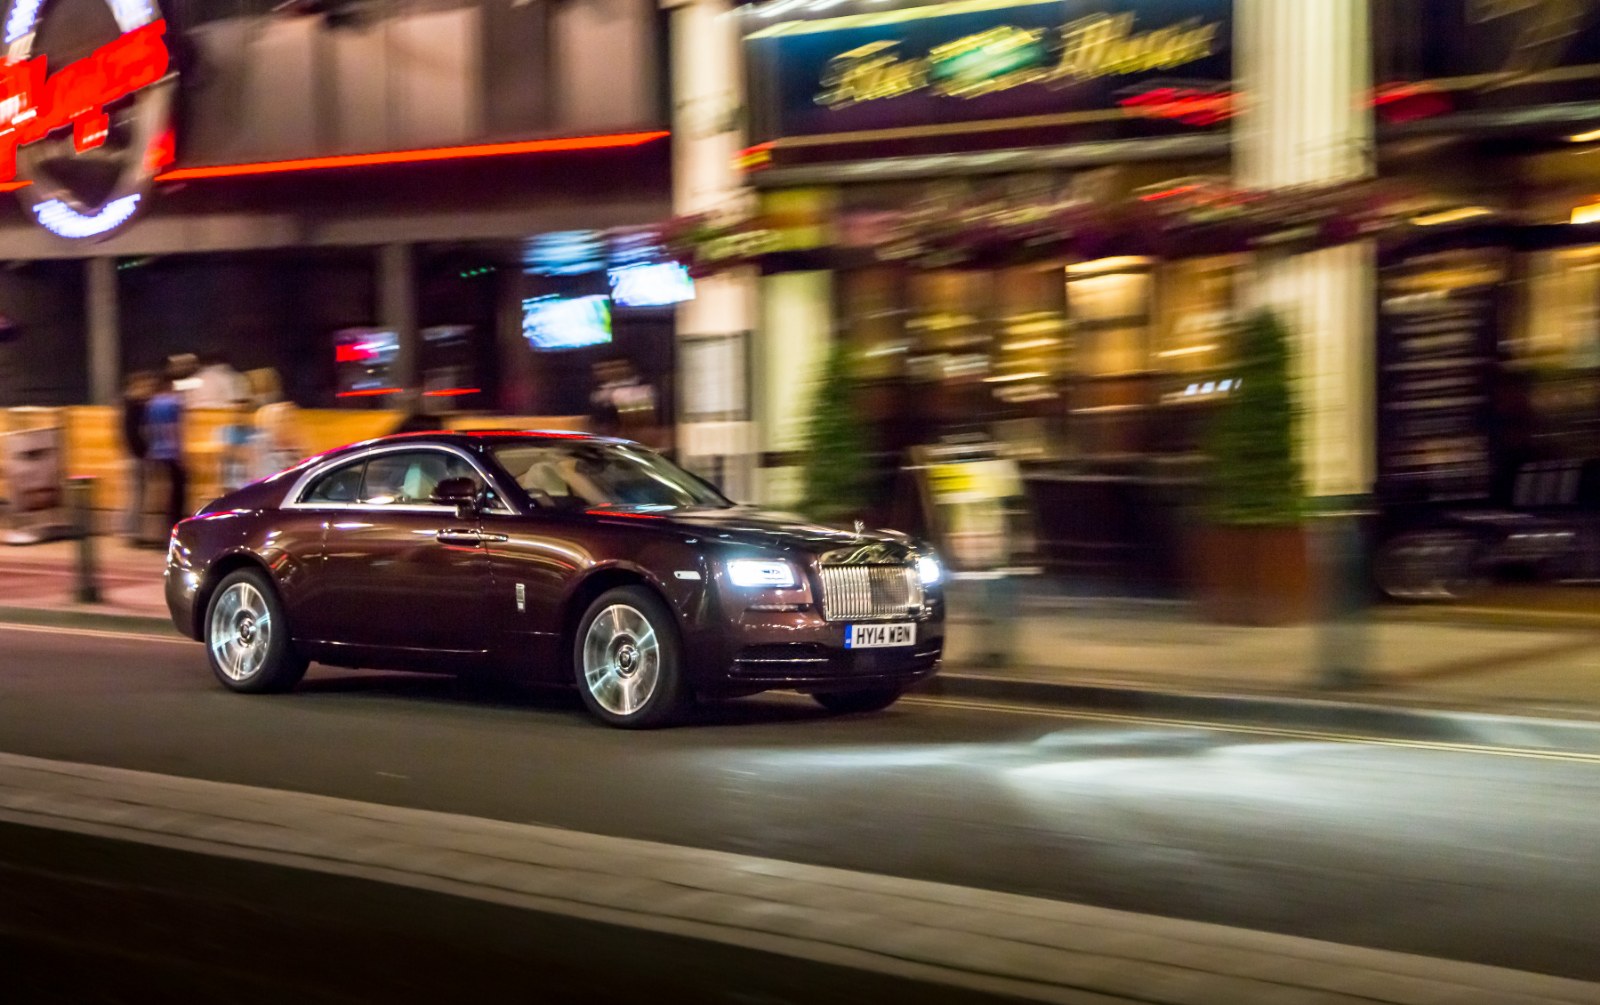 Average Guys with a Rolls Royce Wraith for 5 Days - This Happened